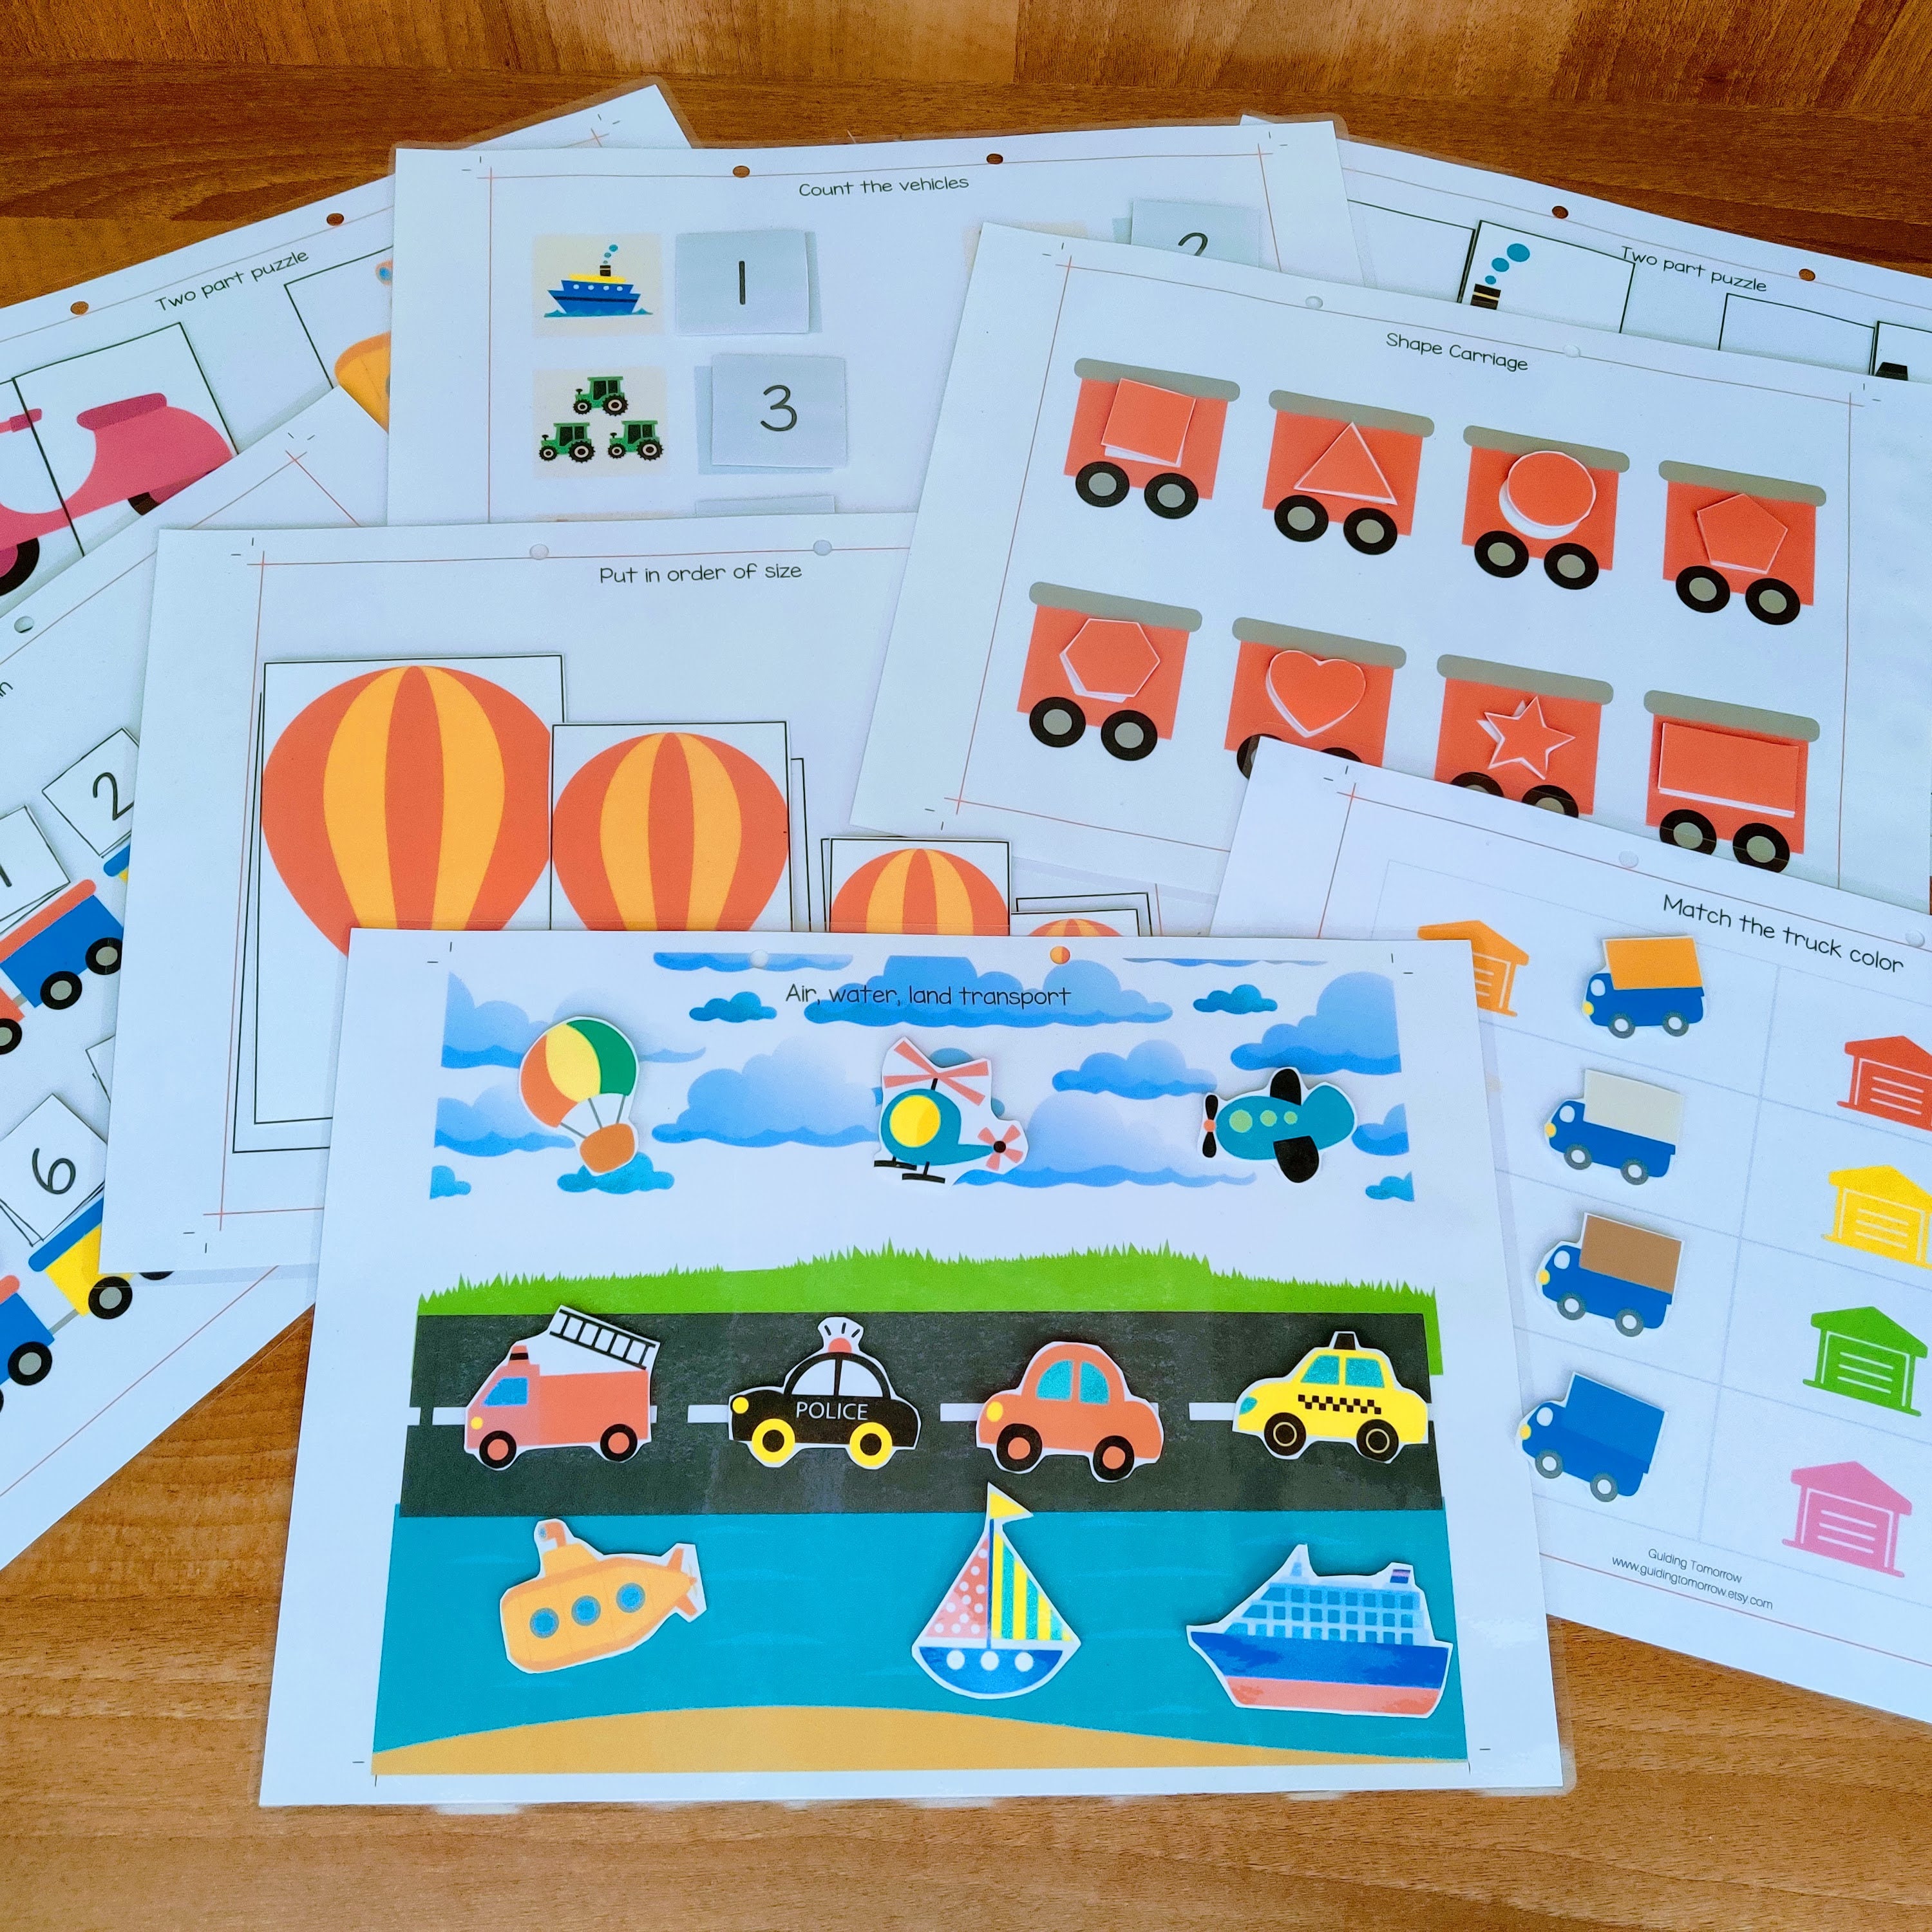 Transportation Matching Game for Toddlers - Simple Fun for Kids VIP